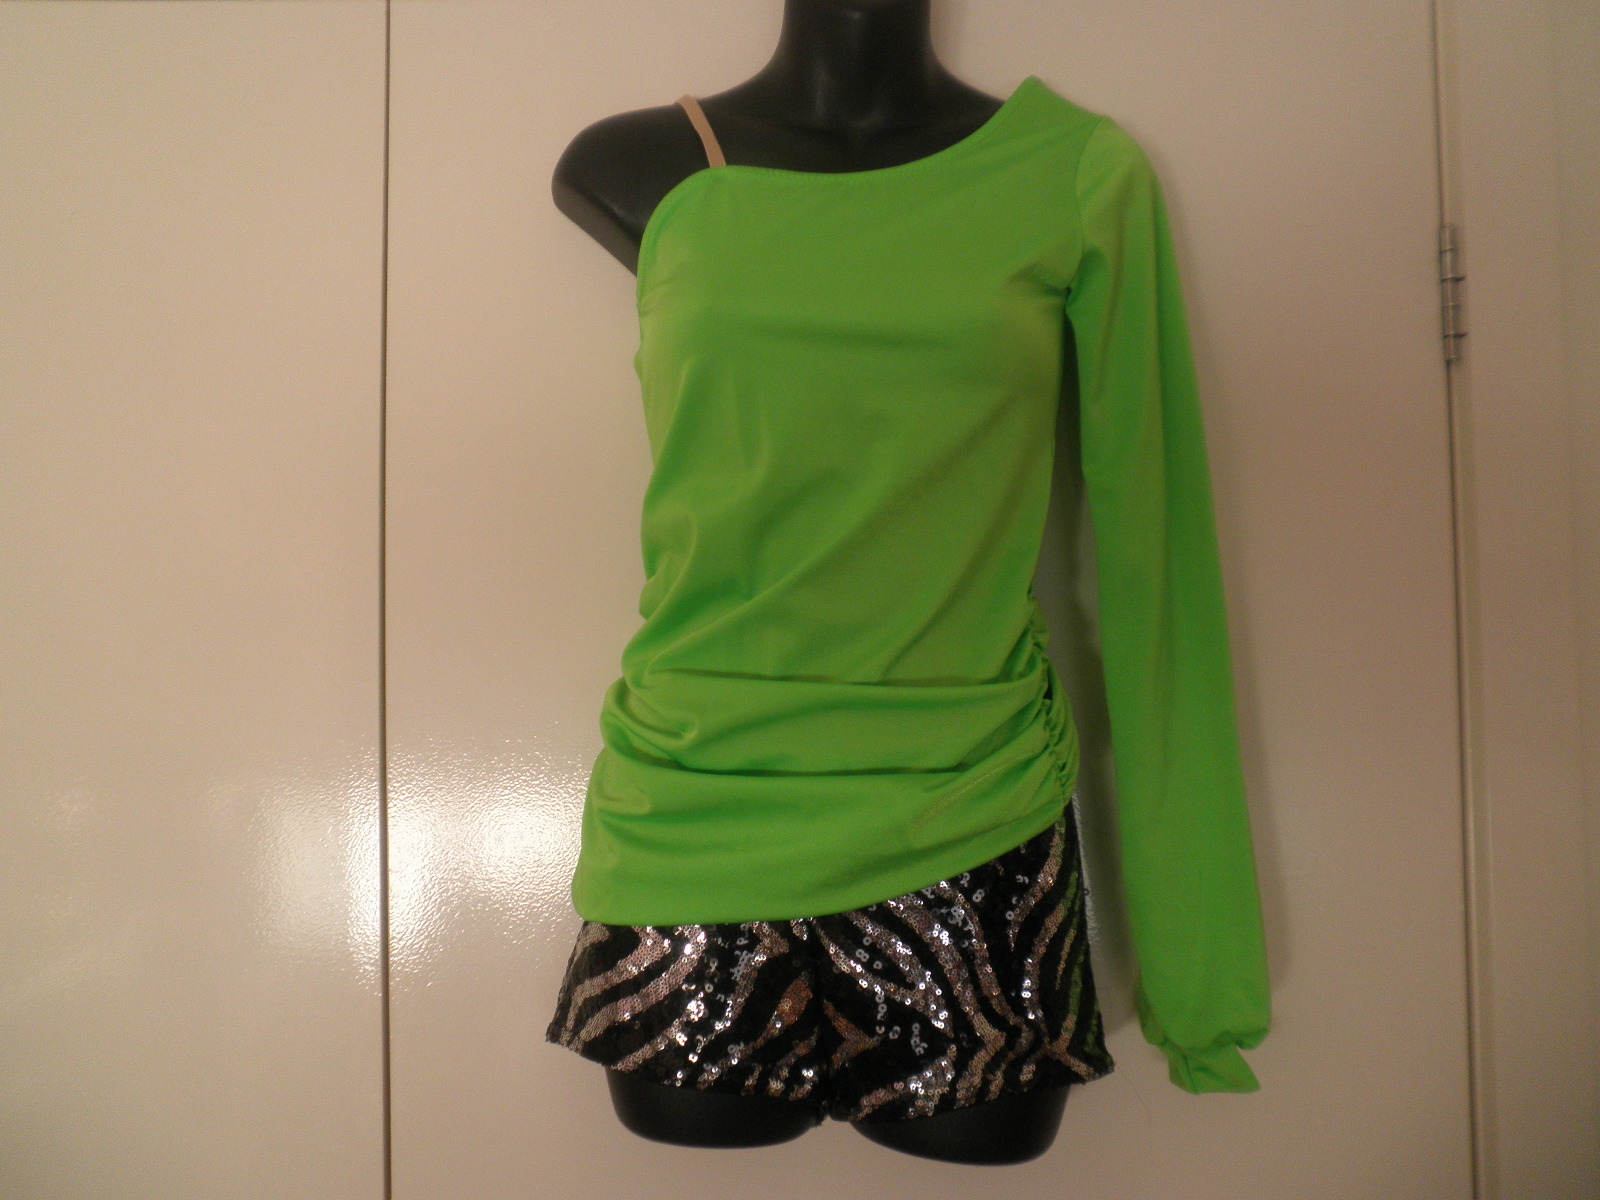 Preloved Solo Curtain Call Lime Green Leotard with Black/Silver Hot Pants AS